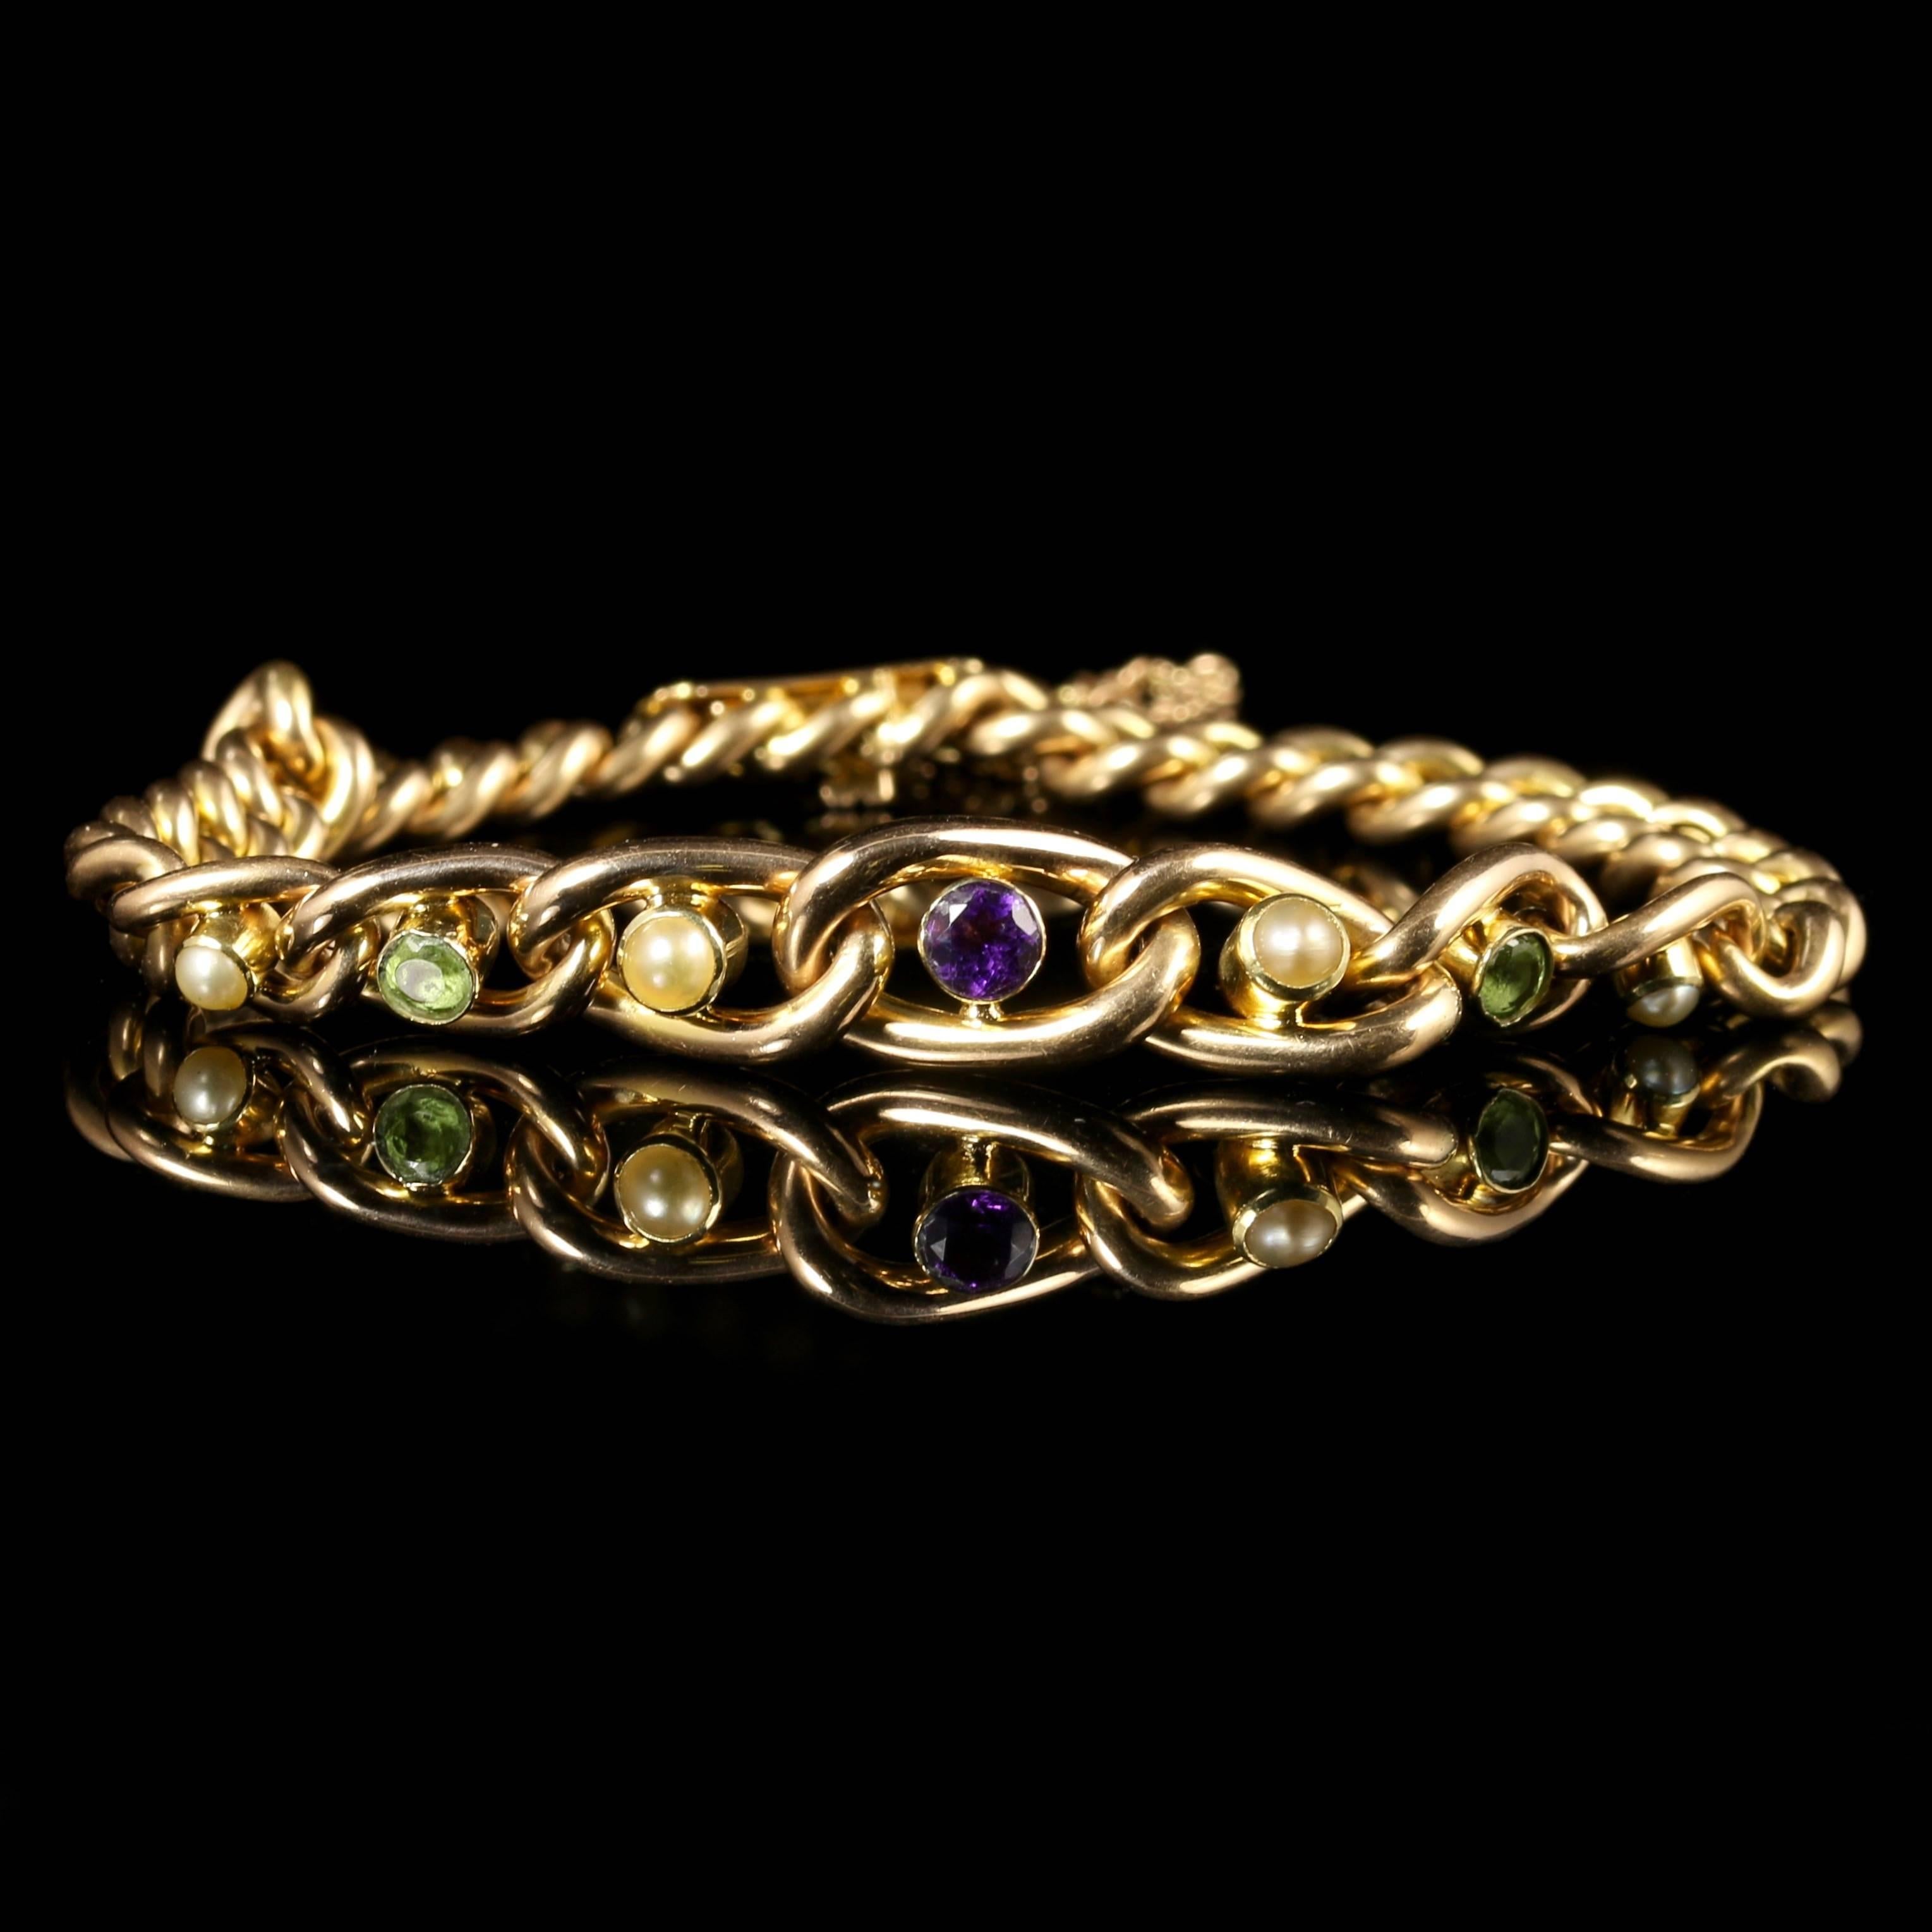 This genuine Victorian 15ct yellow gold antique Suffragette bracelet is circa 1900.

This lovely bracelet is a beautiful curb bracelet, it is steeped in English history,  purchased in London.

Fabulous all round workmanship with detailed 15ct gold